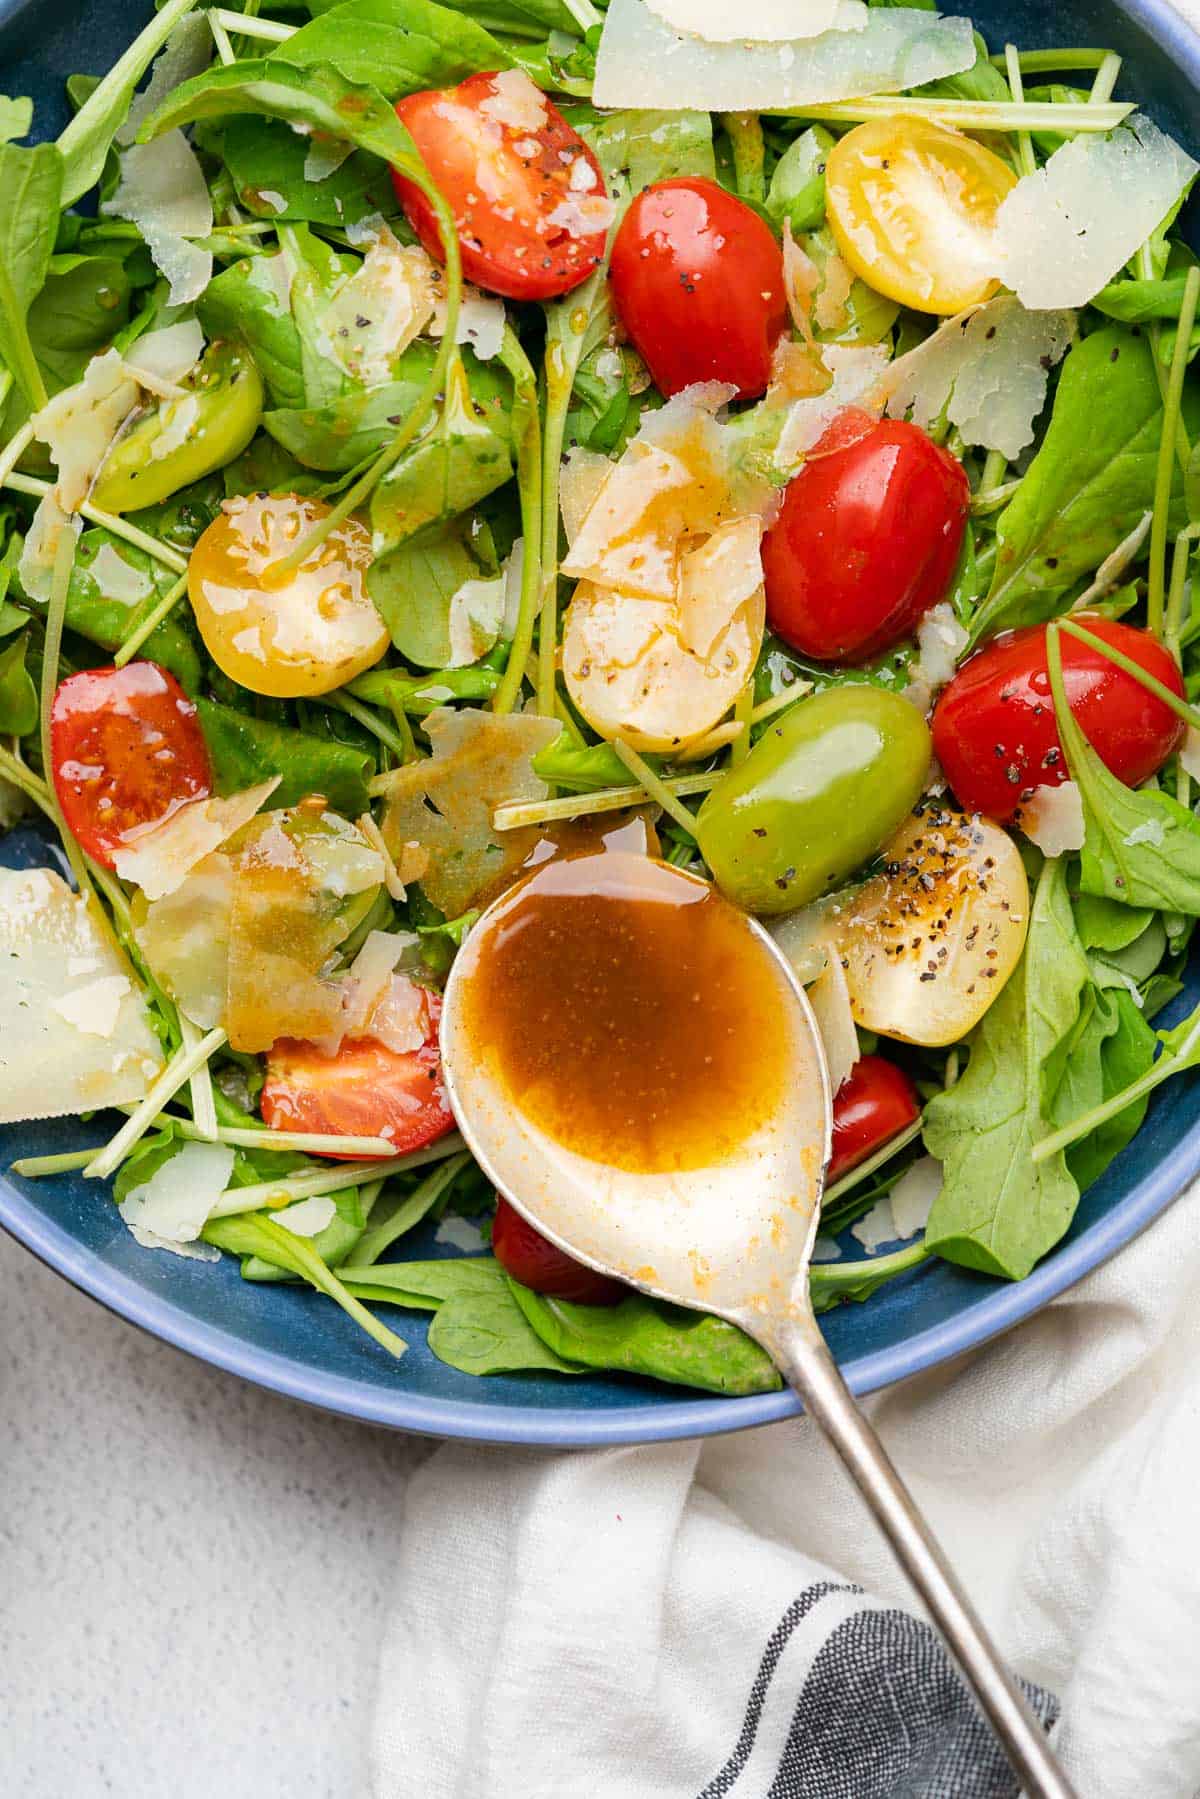 spoonful of creamy balsamic dressing on an arugula side salad with cherry tomatoes